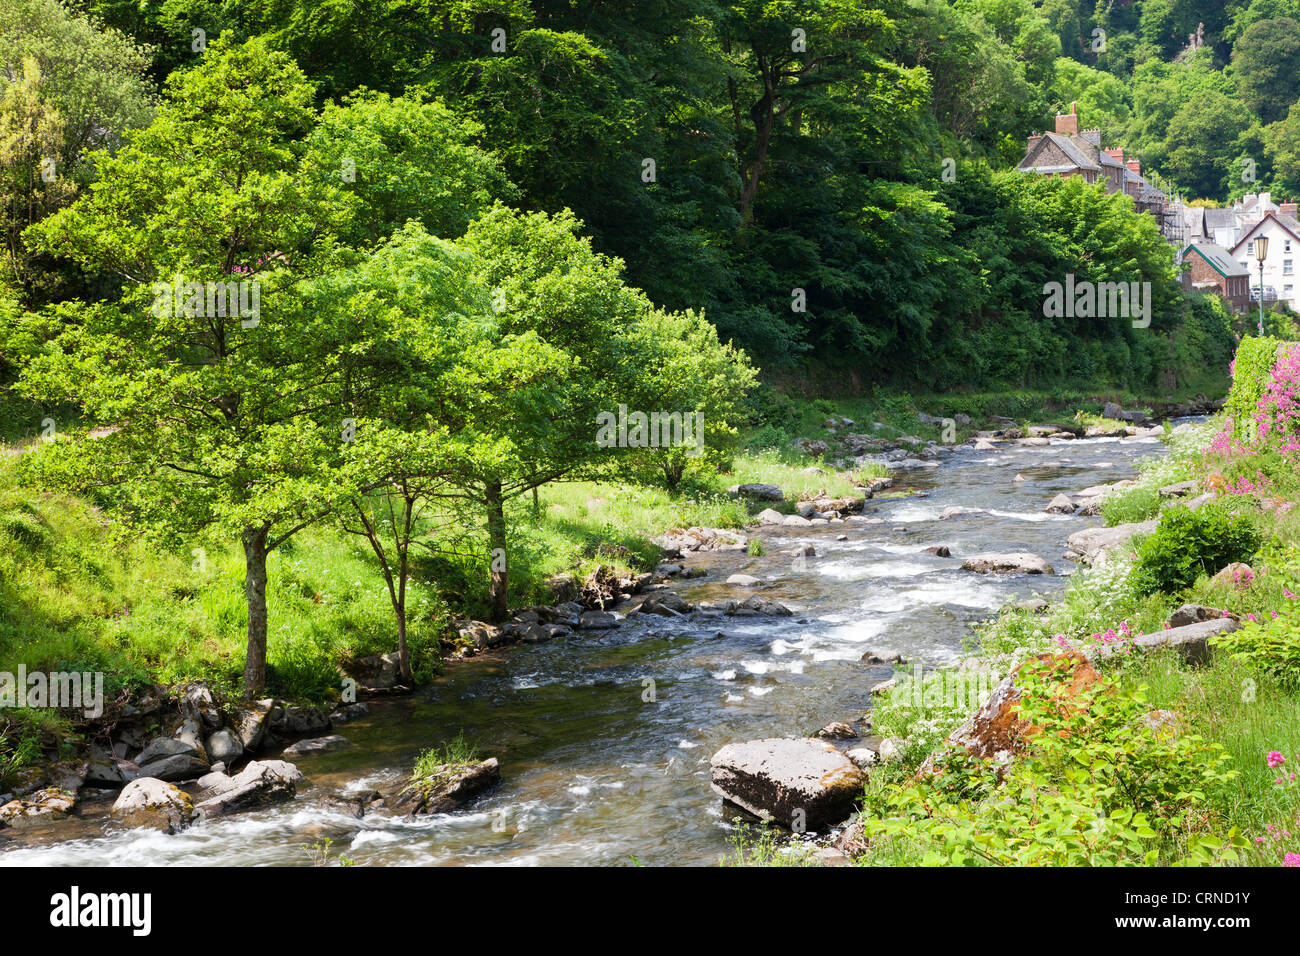 The River Lyn (East) along the path between Watersmeet and Lynmouth, north Devon, England, UK Stock Photo